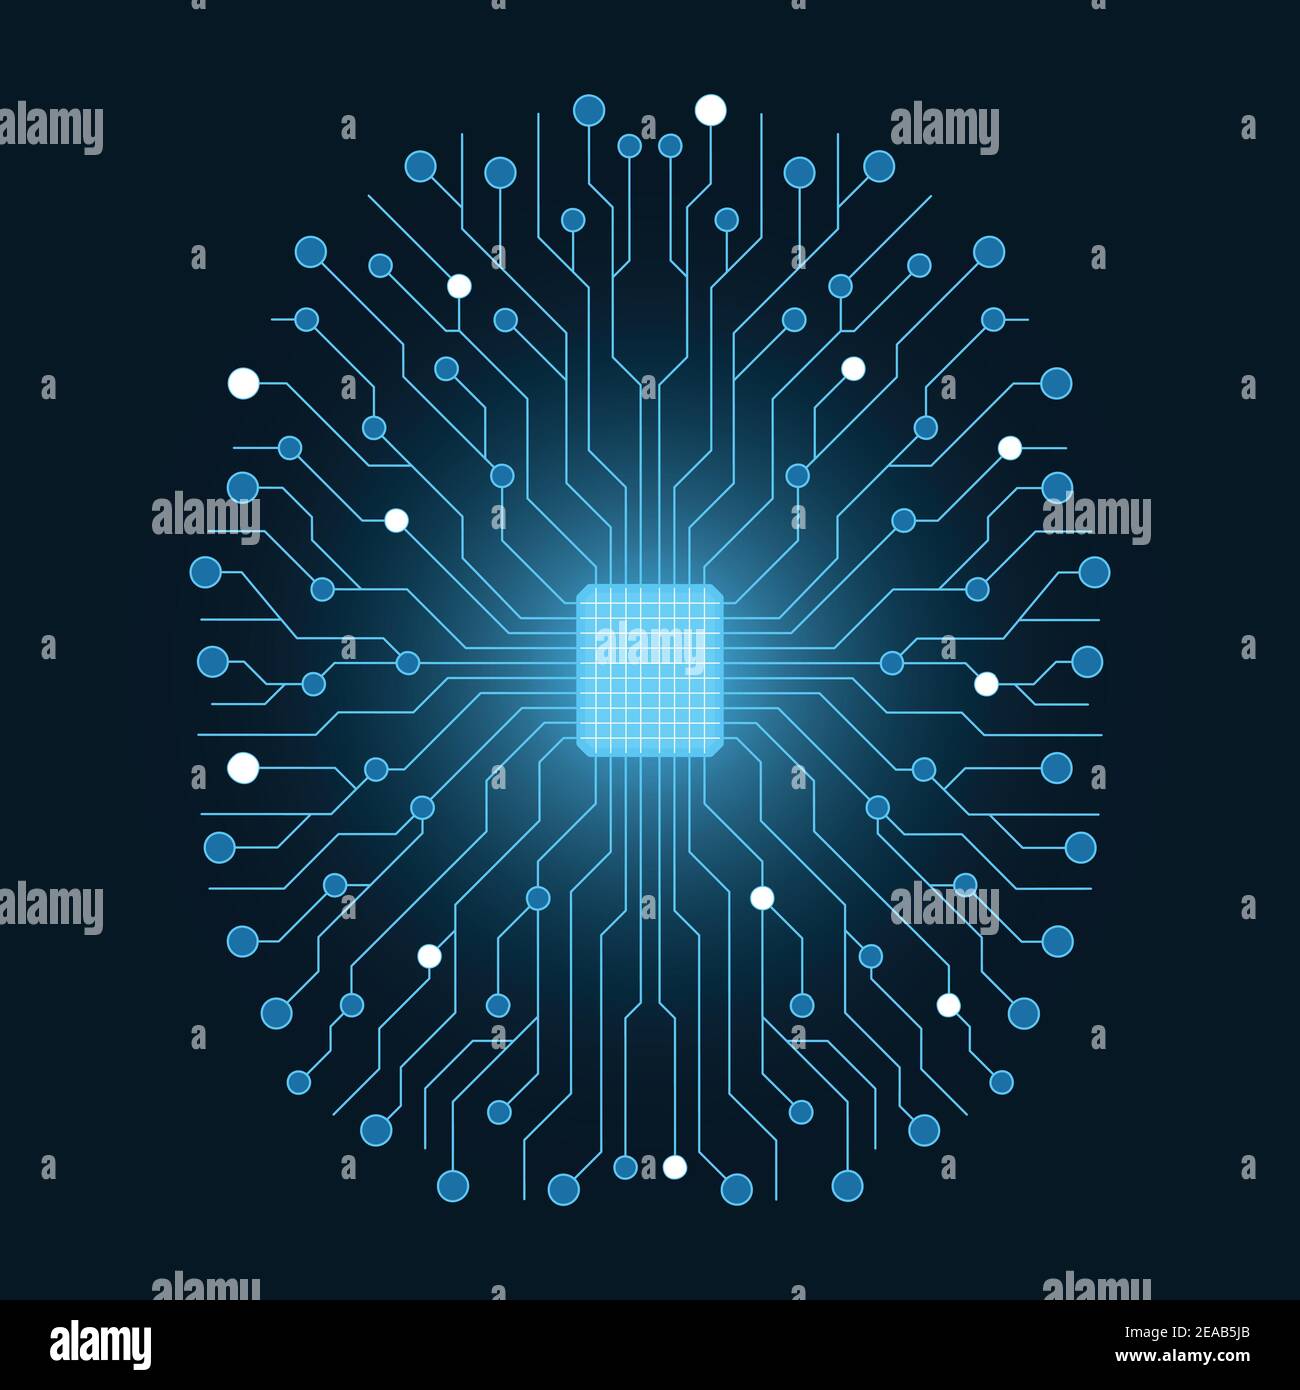 Vector illustration artificial intelligence. Microchip and brain shaped connections. Stock Vector